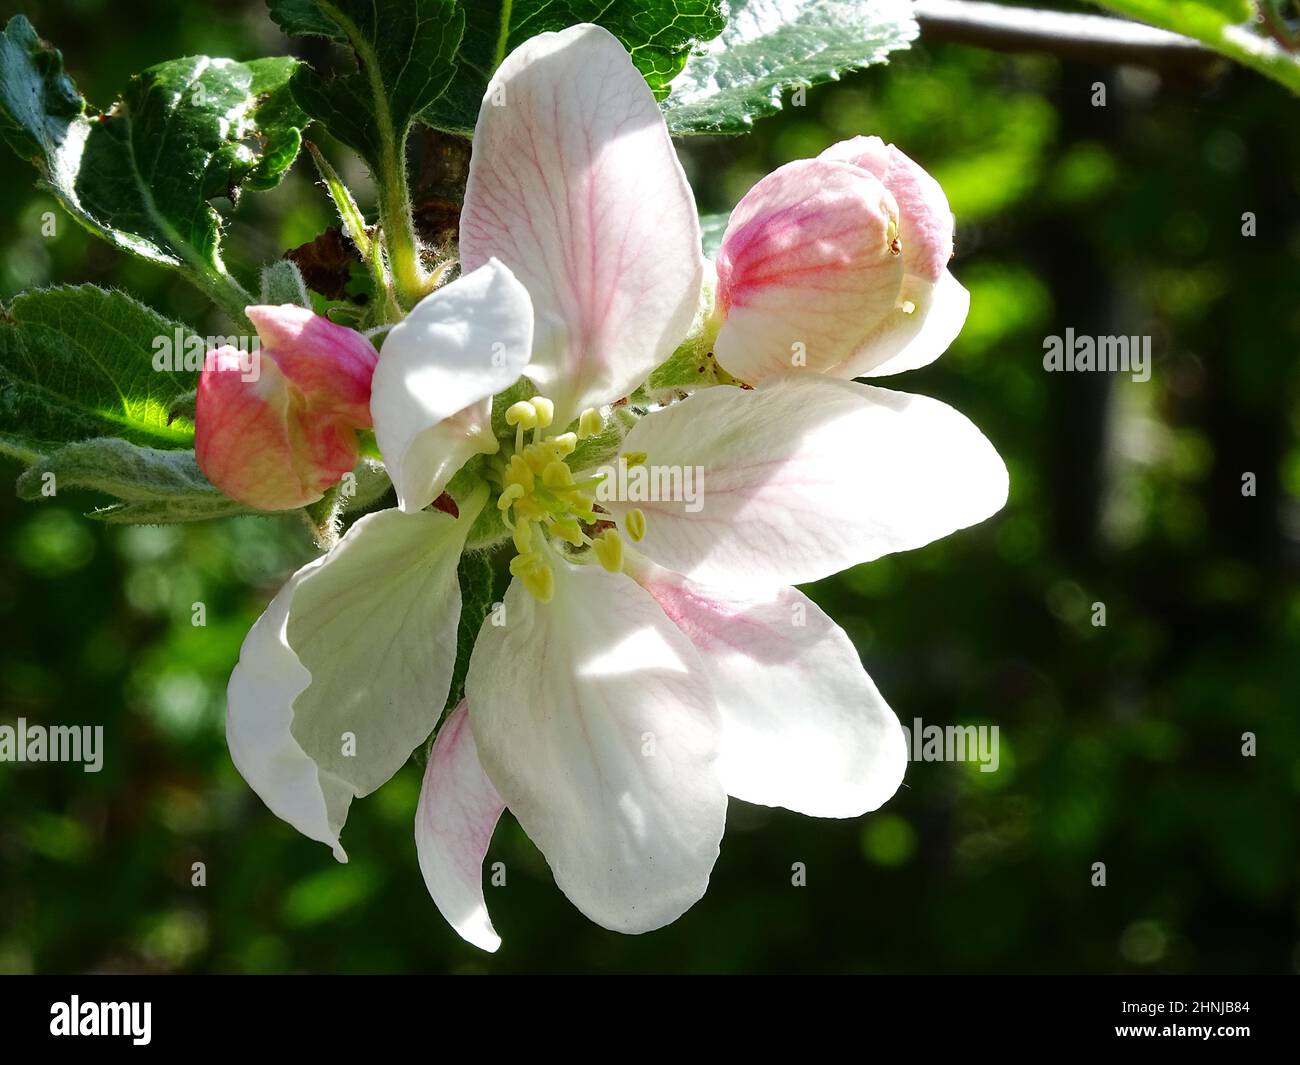 close up of a flower of the apple tree (Cox orange pippin), with a blurred green background, with colors green, pink, white and light pink Stock Photo